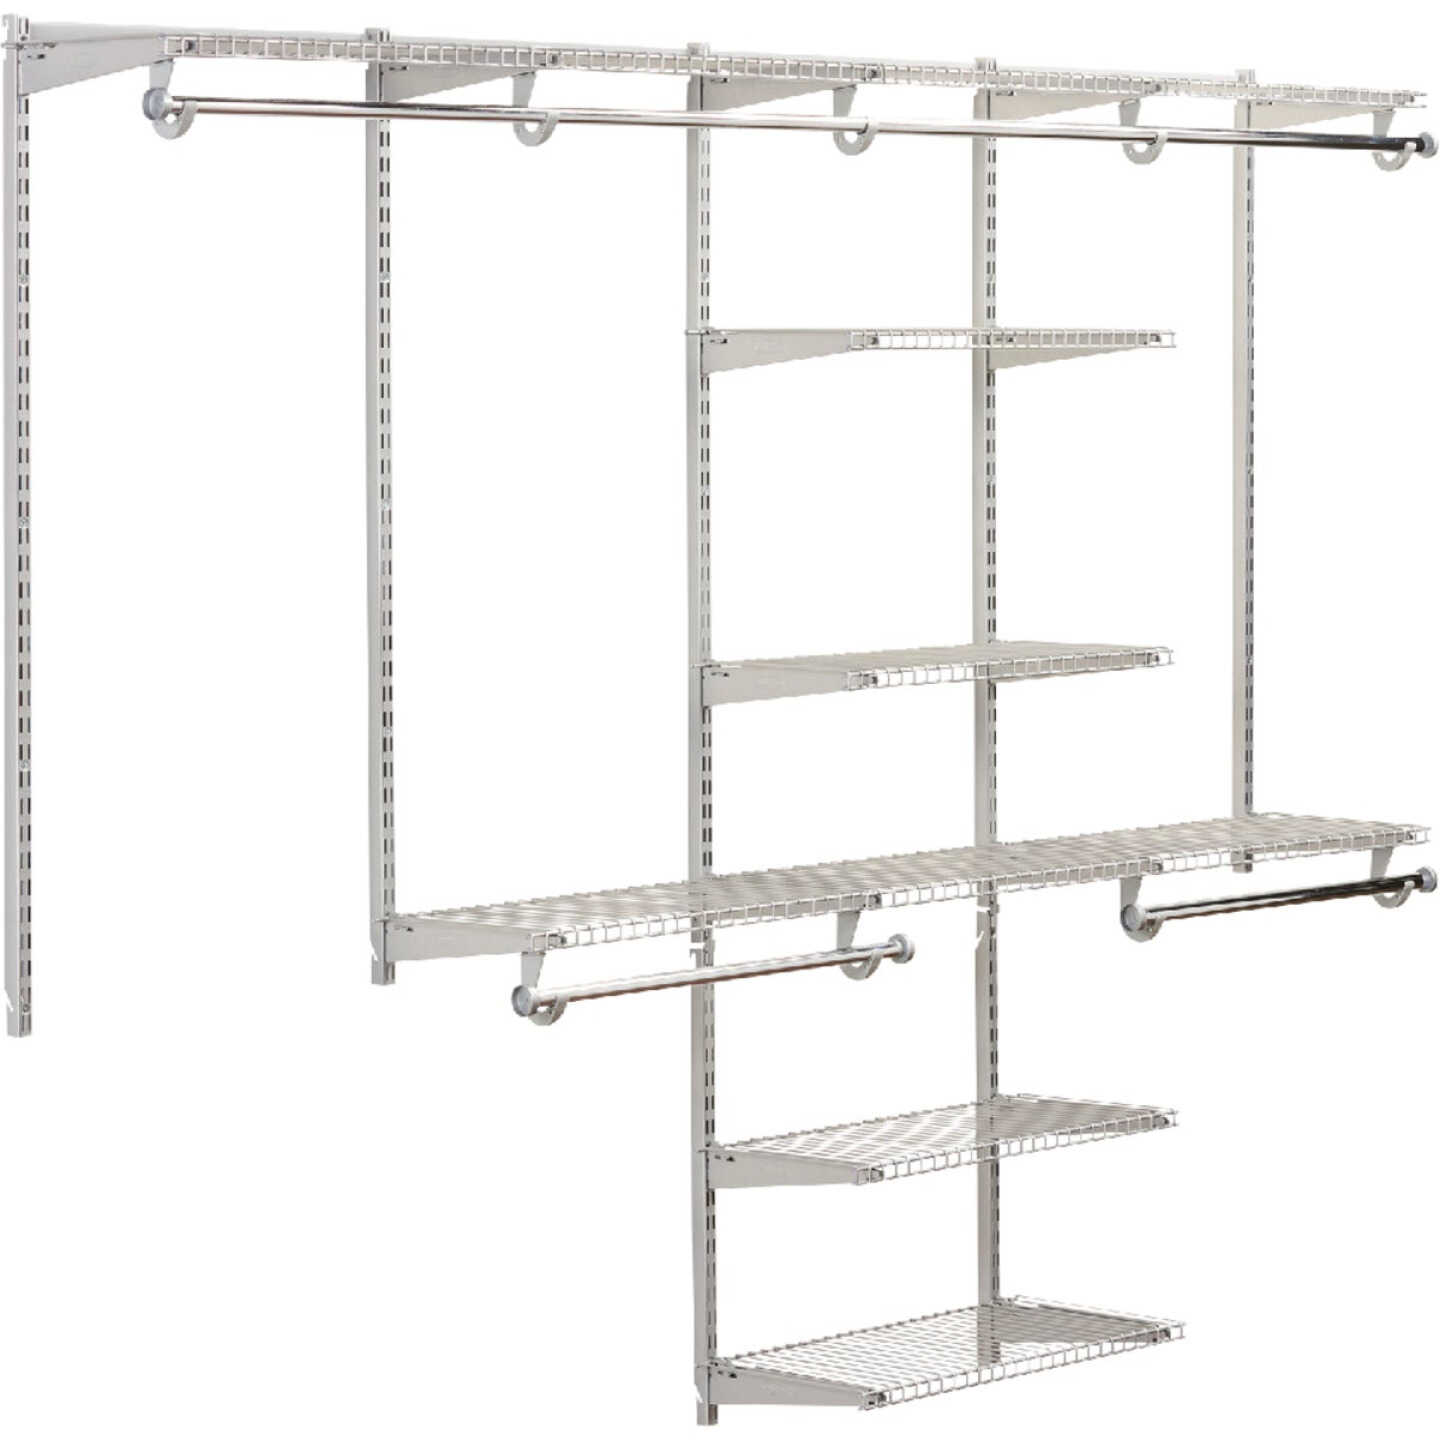 Rubbermaid Configurations Deluxe Closet Kit, Titanium, 4-8 Ft., Wire  Shelving Kit with Expandable Shelving and Telescoping Rods, Custom Closet